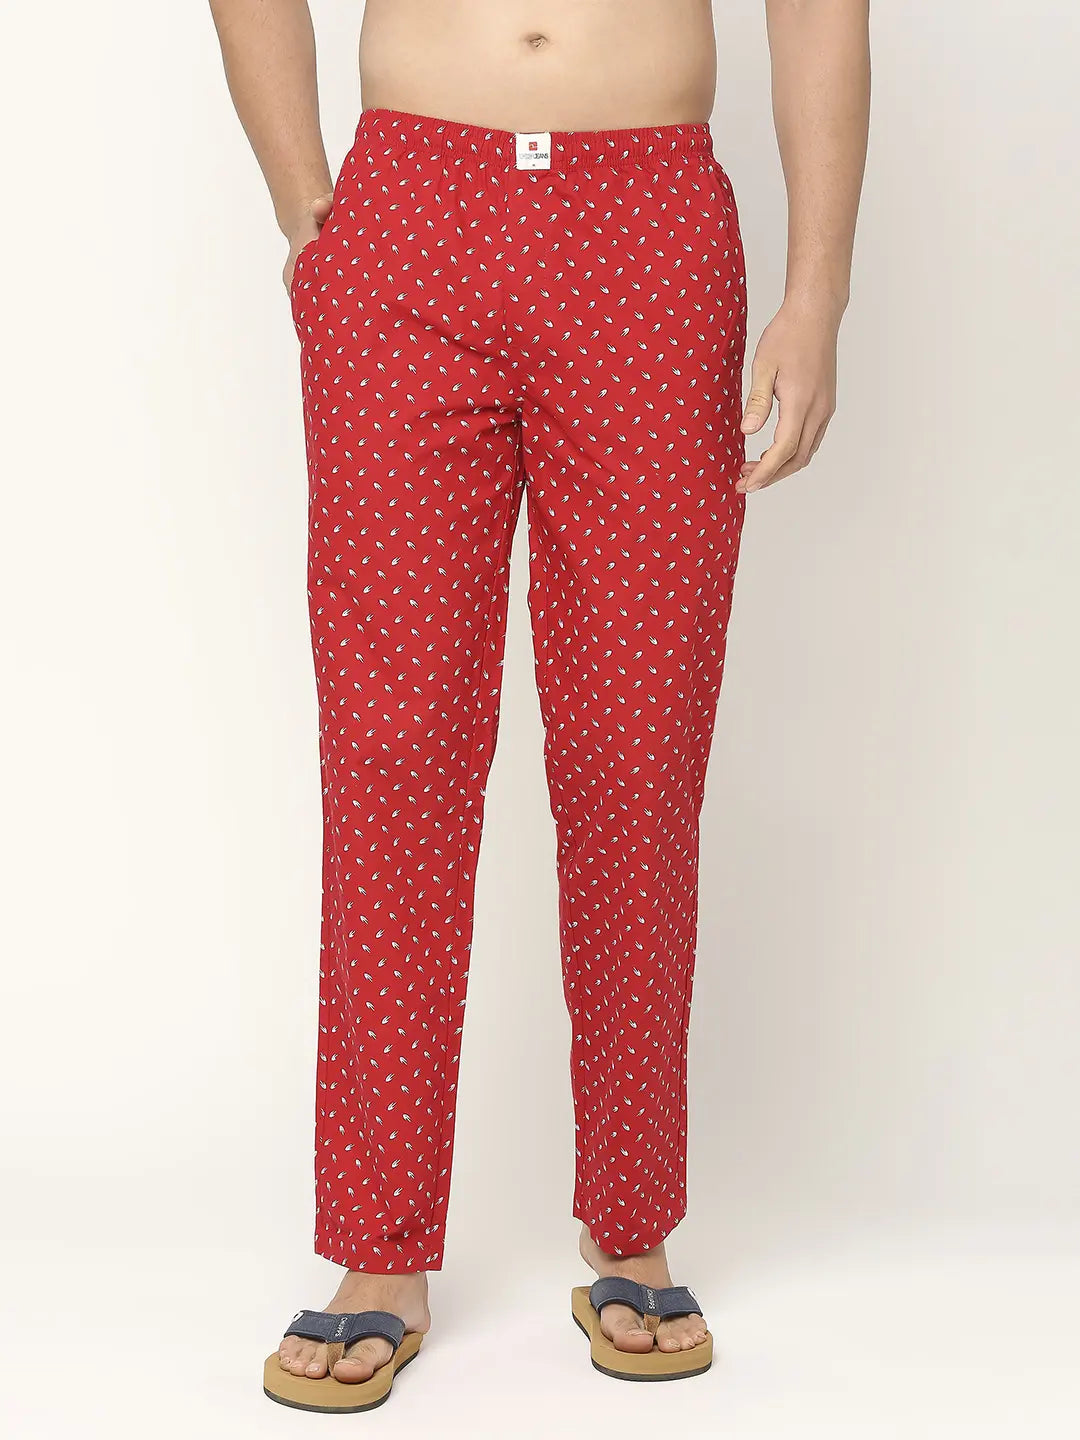 Official Site of PajamaJeans  Pajamas you live in Jeans you sleep in   PajamaJeans